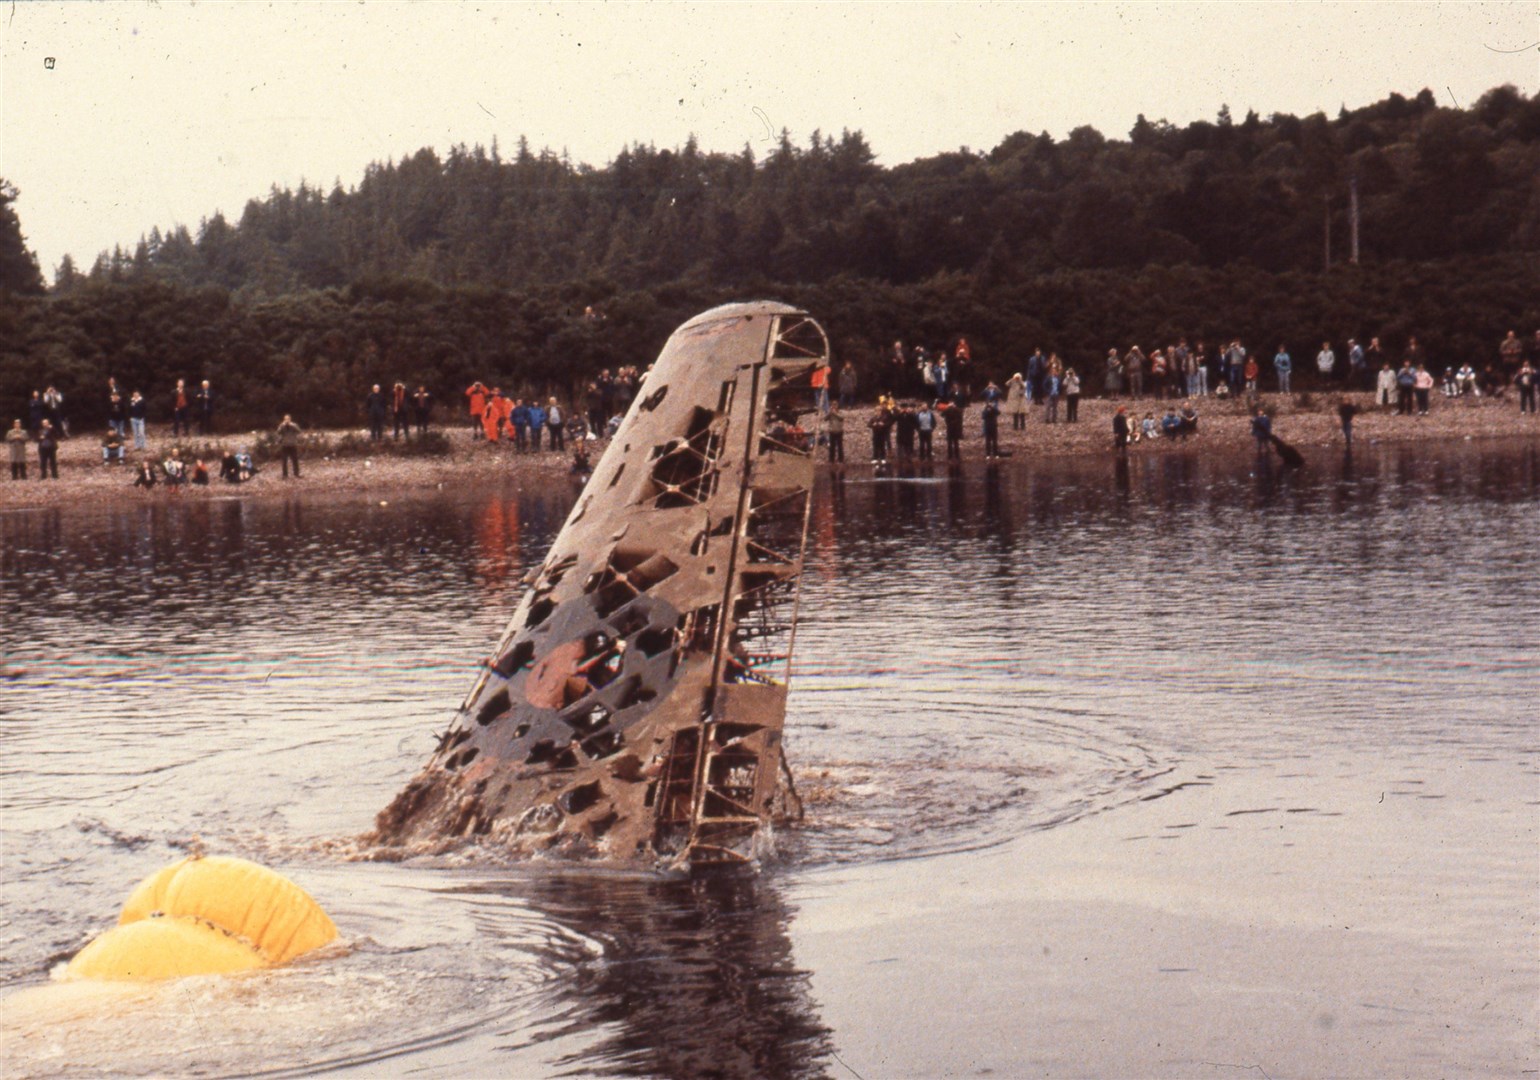 The Wellington Bomber emerges from Loch Ness. Picture supplied by Brooklands Museum.